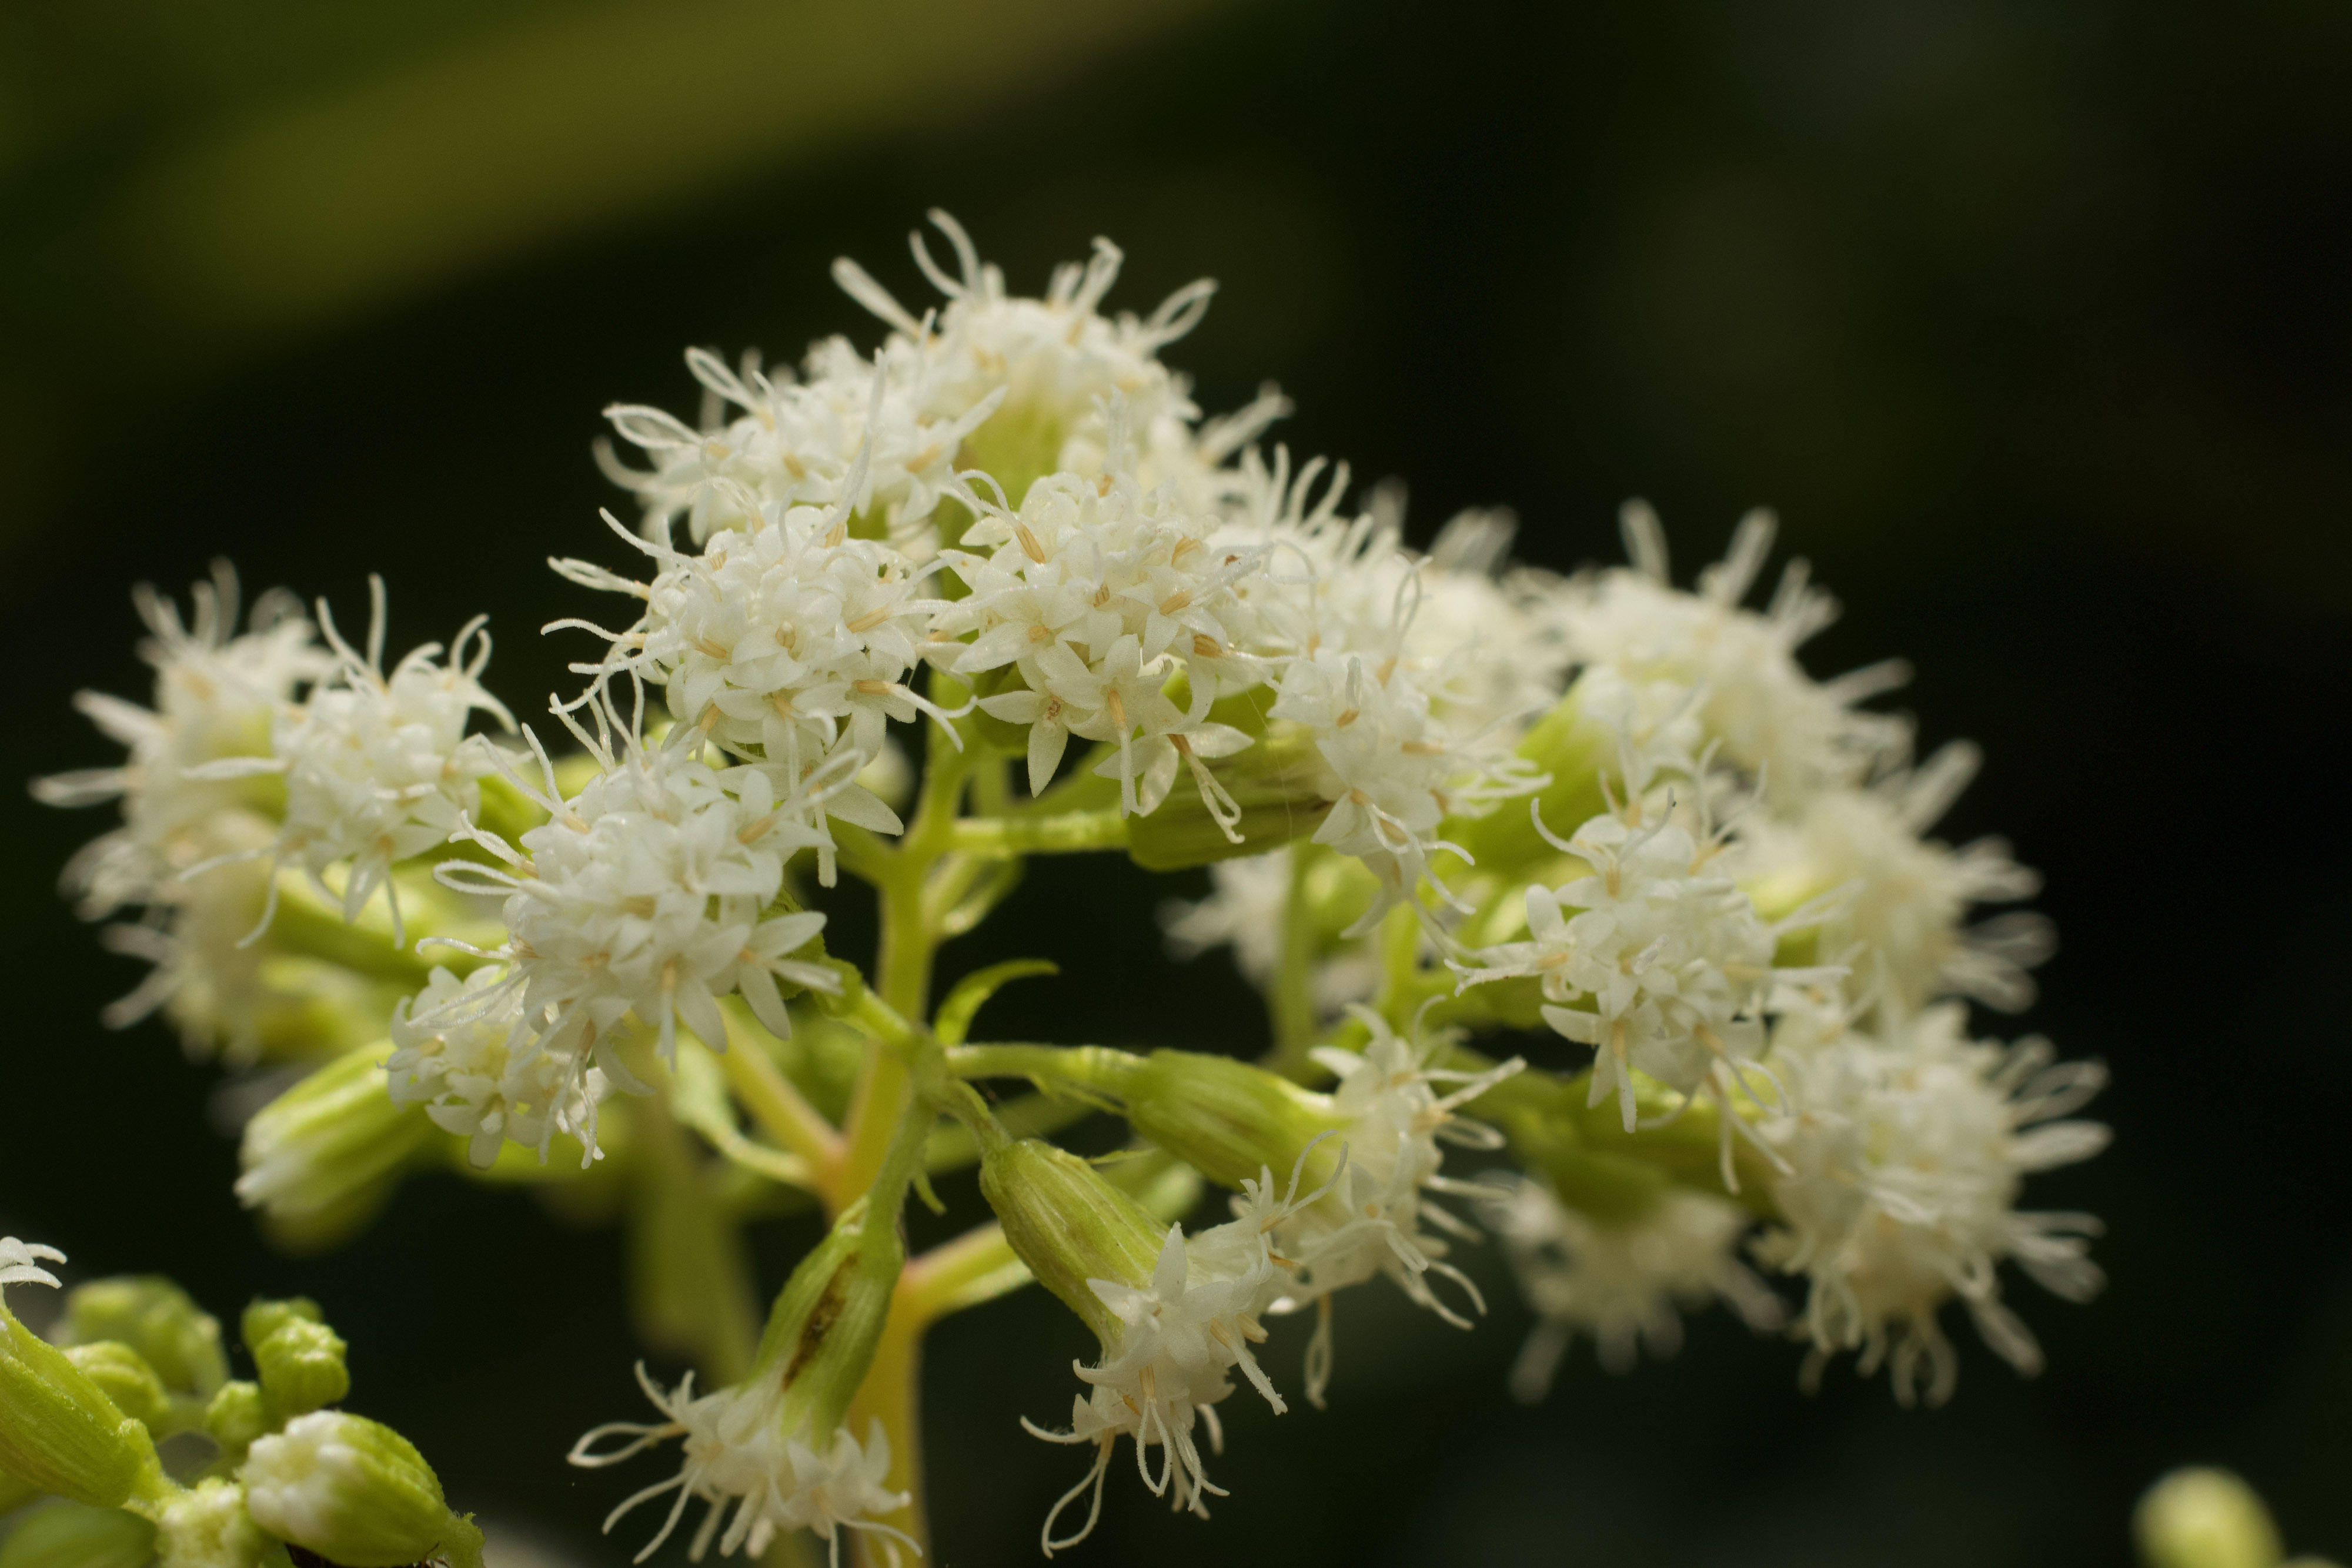 Clusters of white snakeroot flowers and green stems.